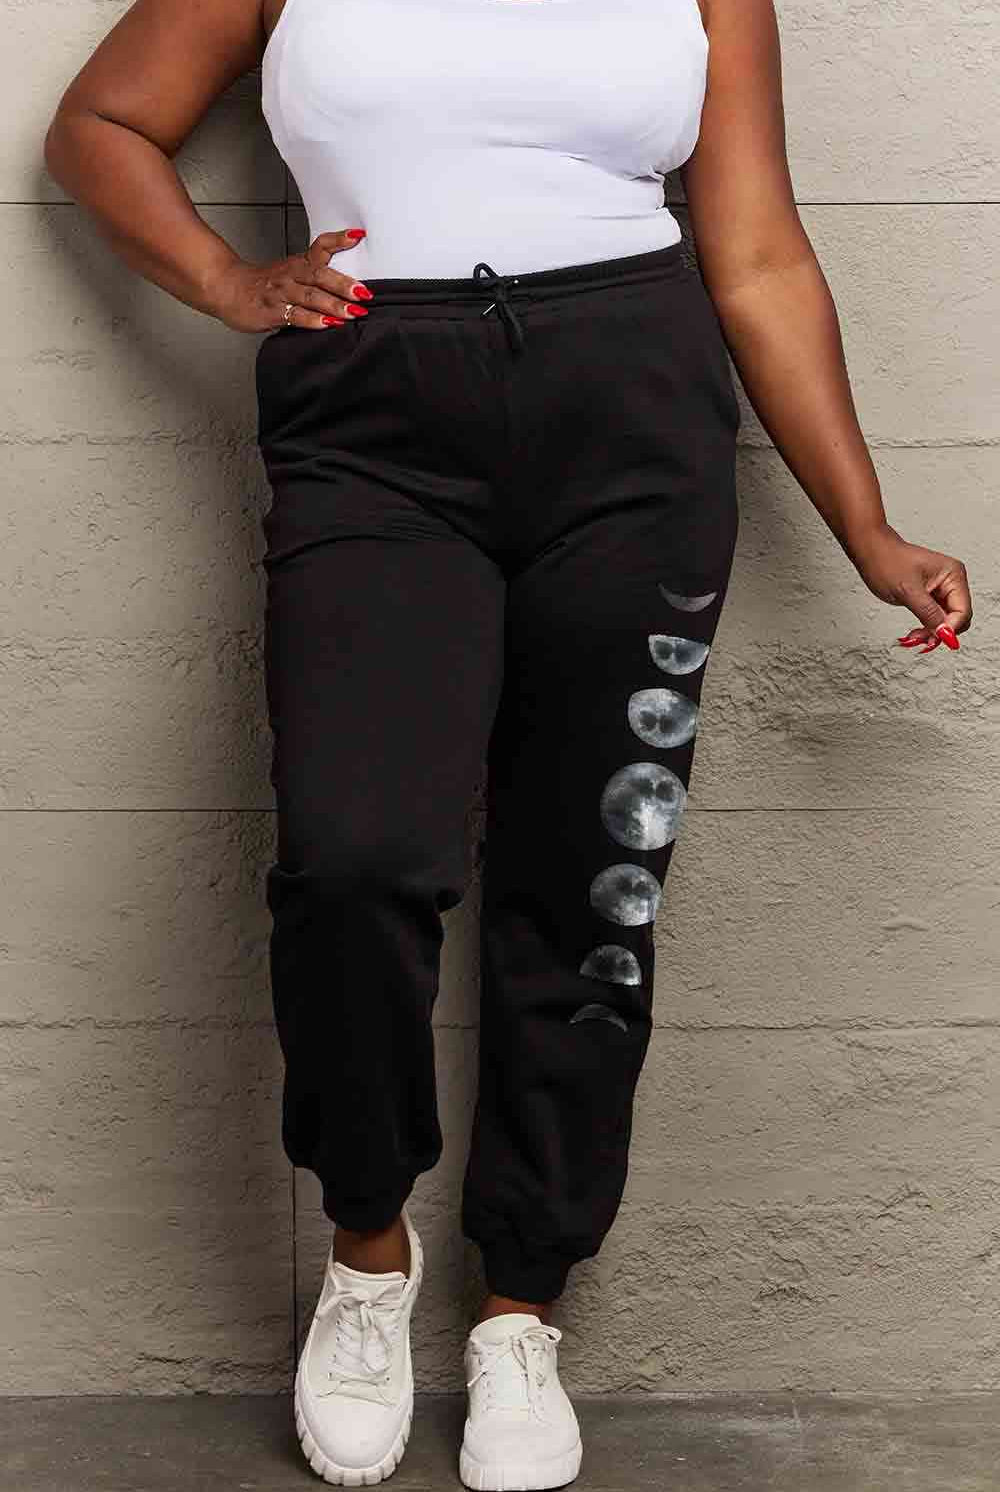 Simply Love Full Size Lunar Phase Graphic Sweatpants - GemThreads Boutique